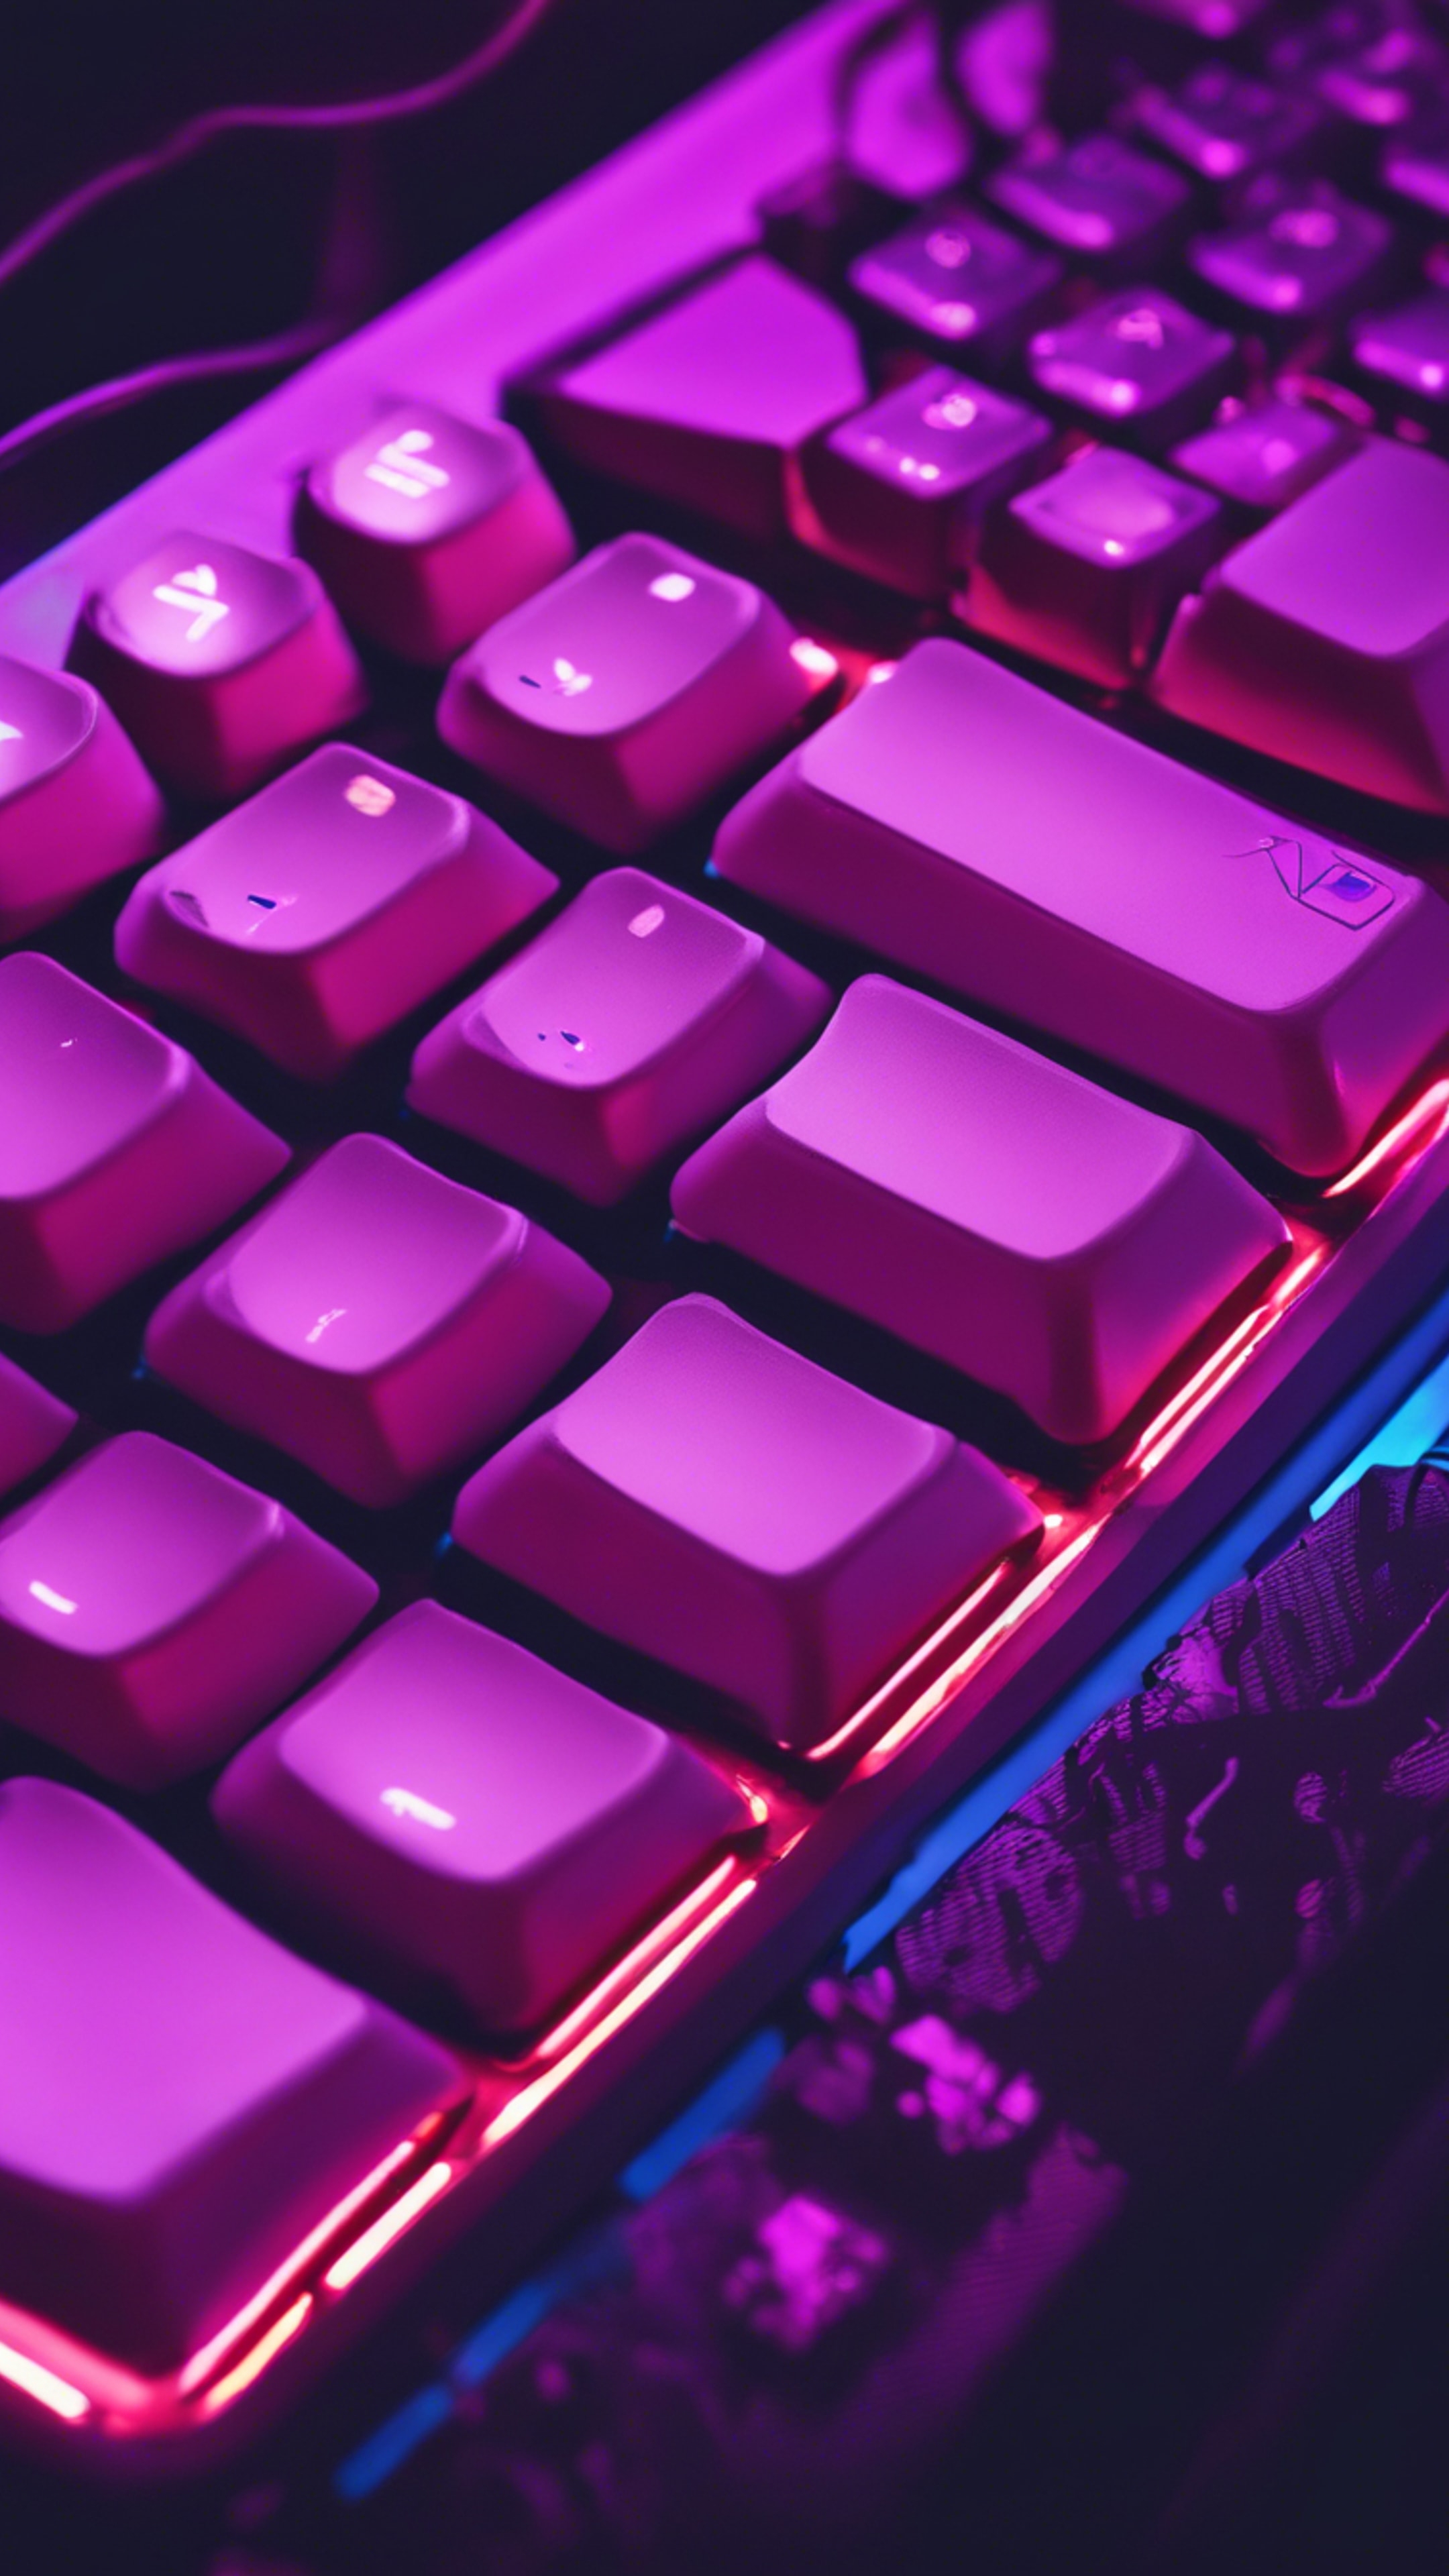 A detailed close-up image of a neon purple backlit gaming keyboard in a dark room. Hintergrund[fb3f2373aec546b8b630]